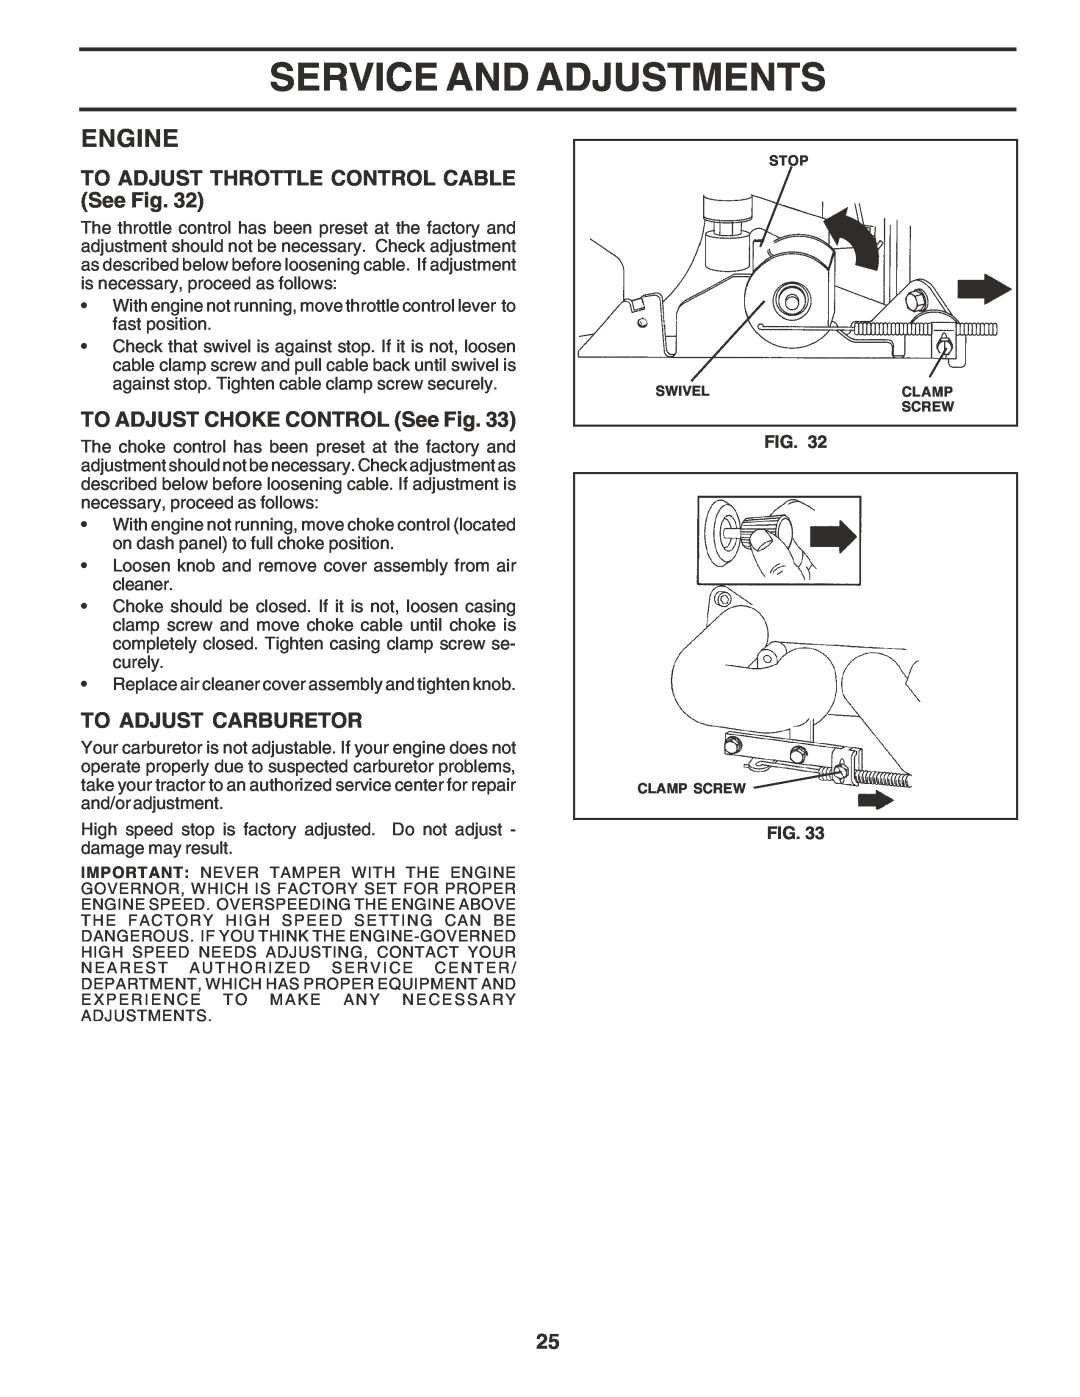 Poulan 180278 TO ADJUST THROTTLE CONTROL CABLE See Fig, TO ADJUST CHOKE CONTROL See Fig, To Adjust Carburetor, Engine 